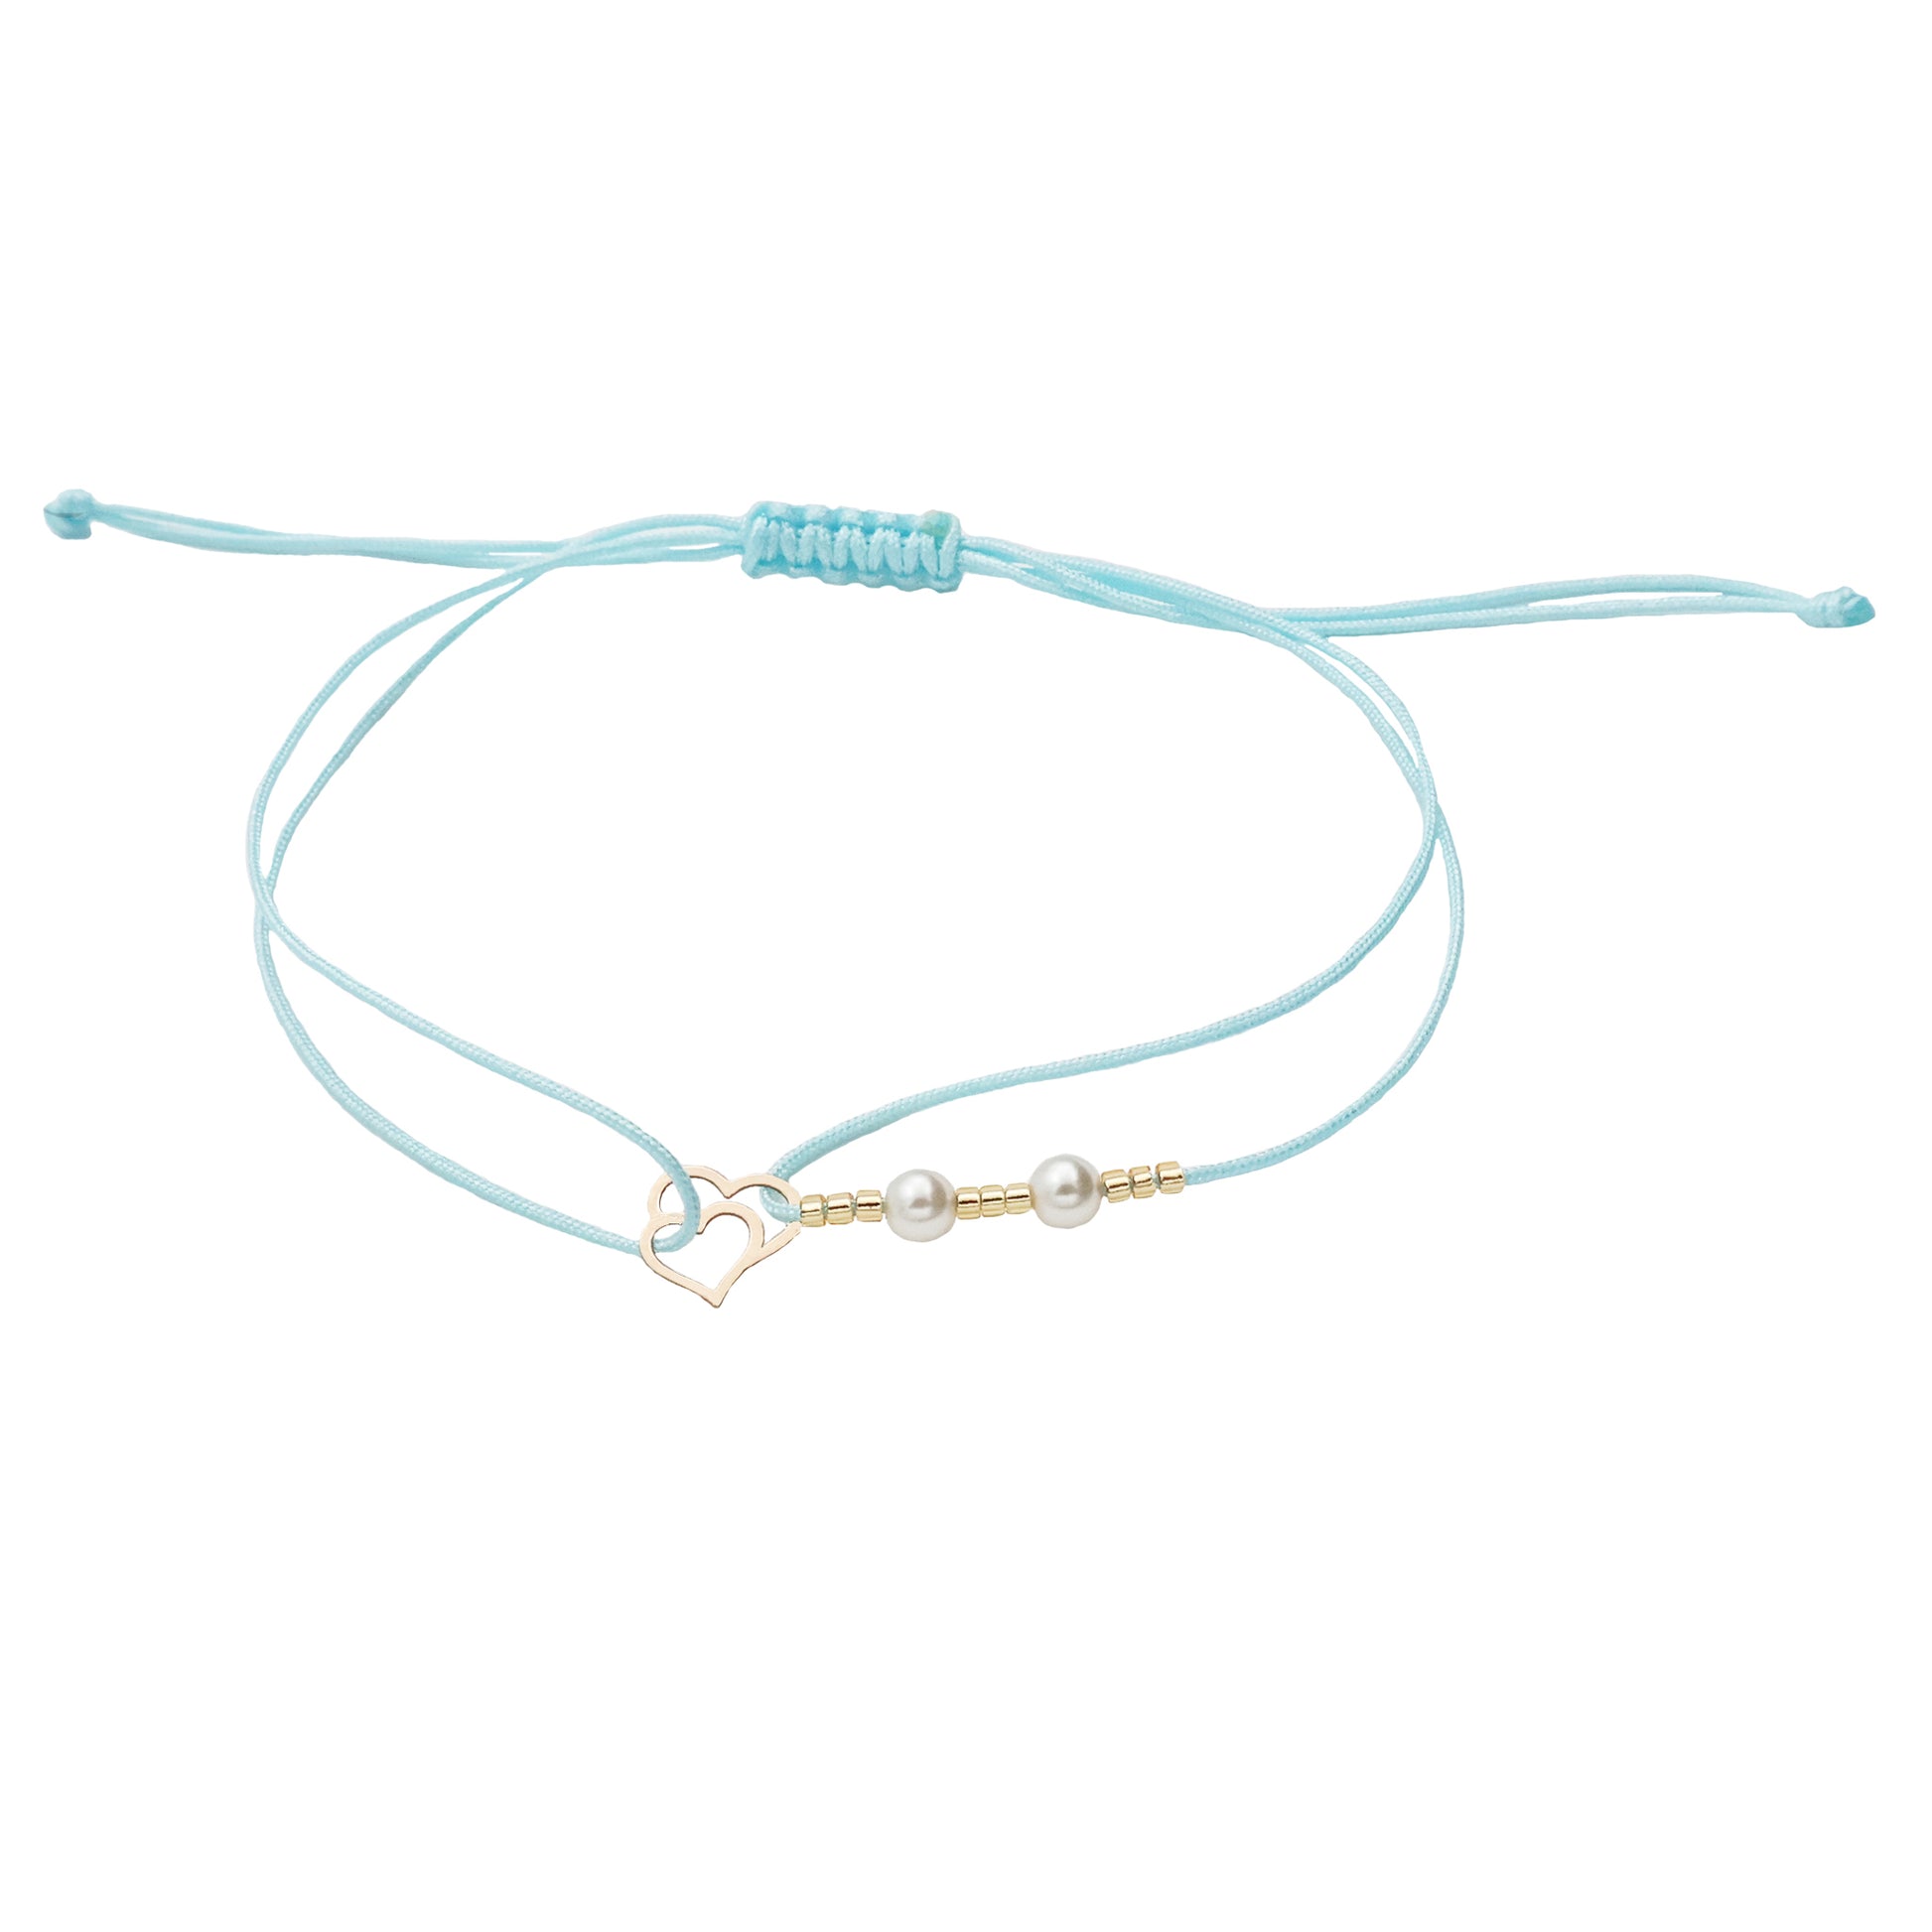 Bracelet with heart 14K solid gold pendant, Miyuki beads and 2 artificial pearls Vega Lopez